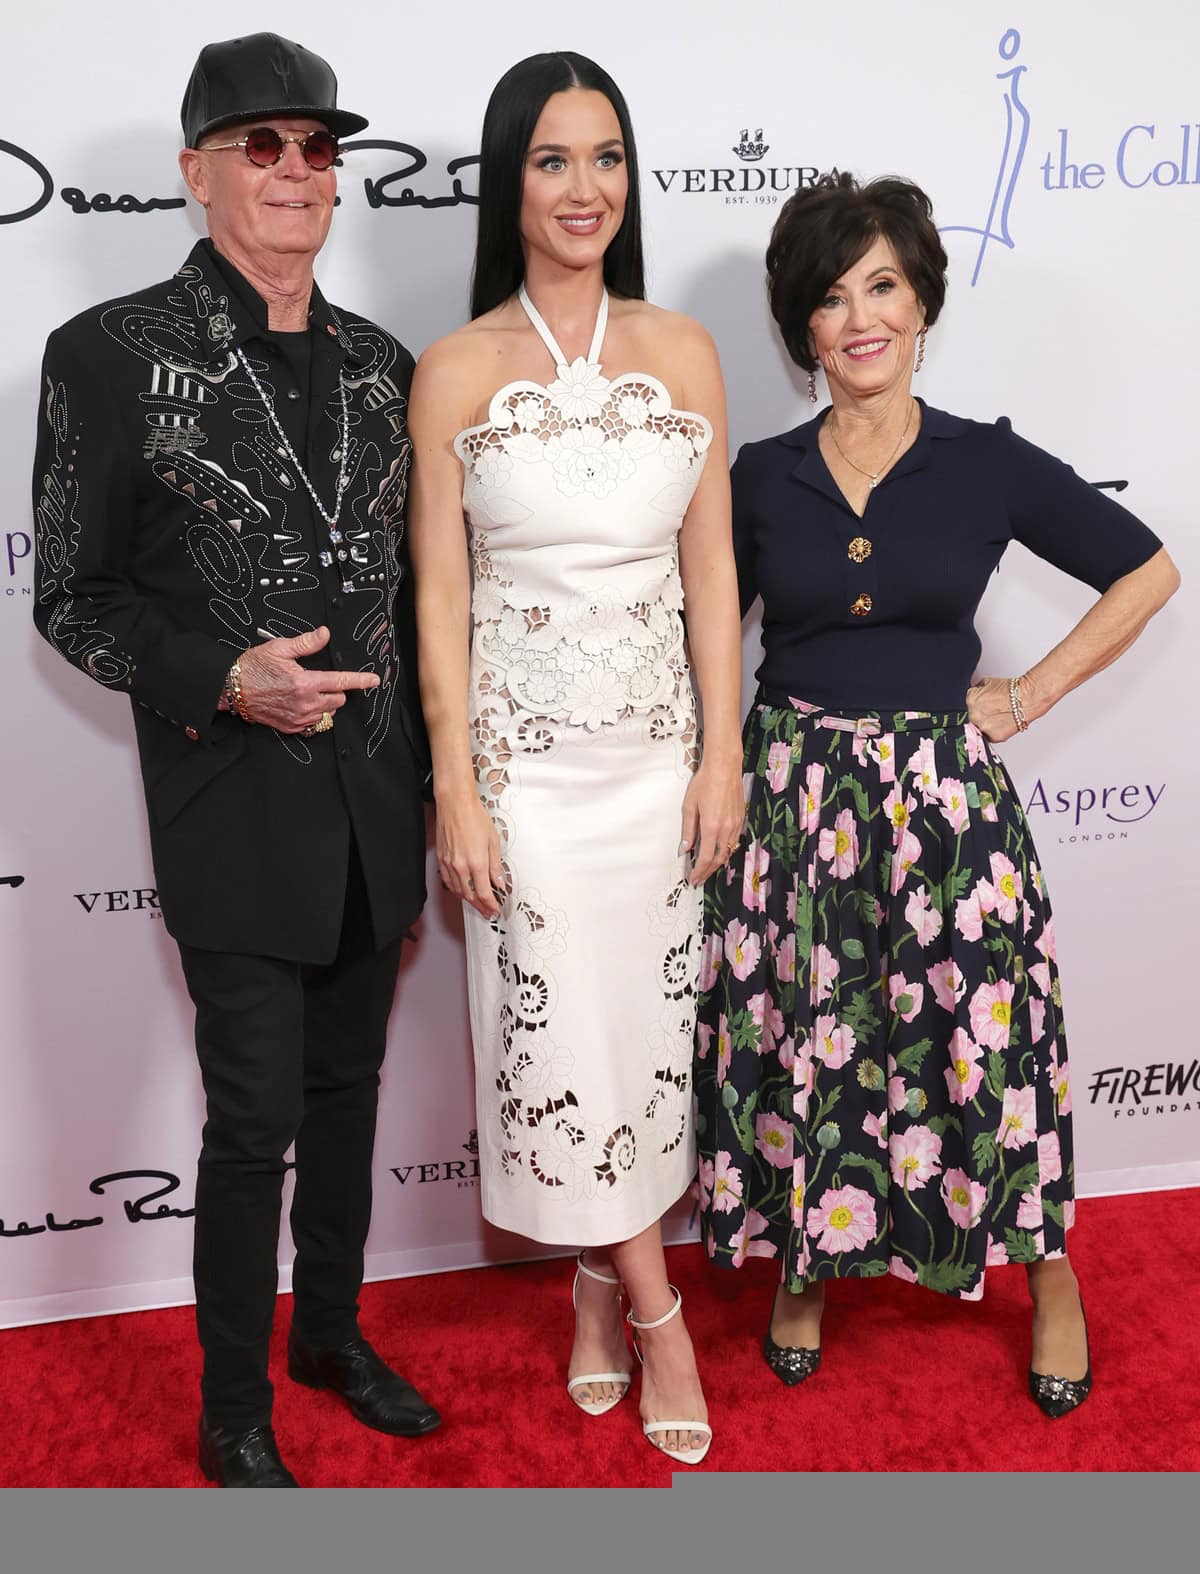 Family First: Katy Perry shines with her parents at the Beverly Wilshire event, making a glamorous family affair